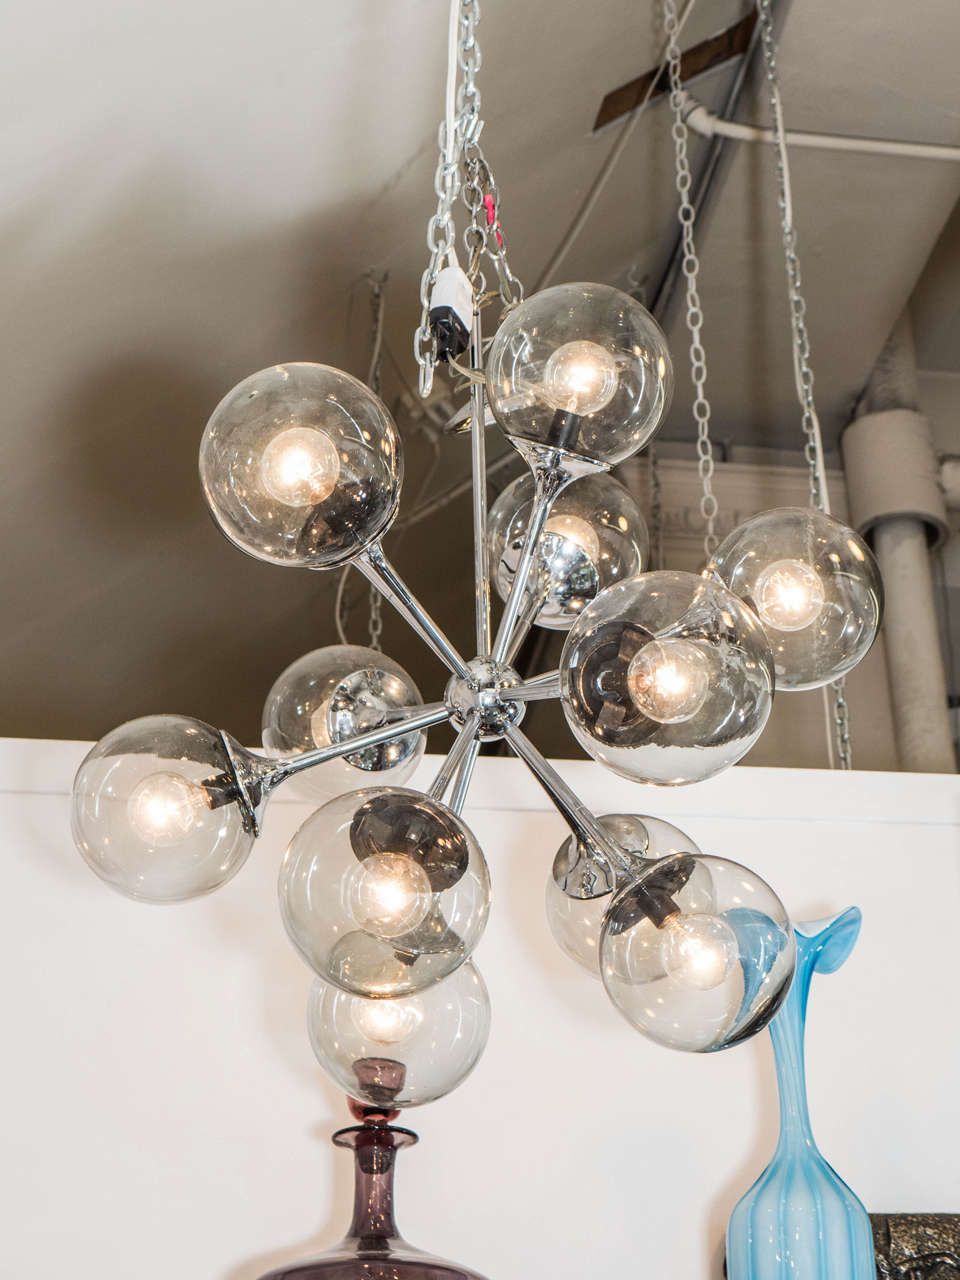 Midcentury Chrome And Smoked Bubble Glass Sputnik Within Glass And Chrome Modern Chandeliers (View 1 of 15)